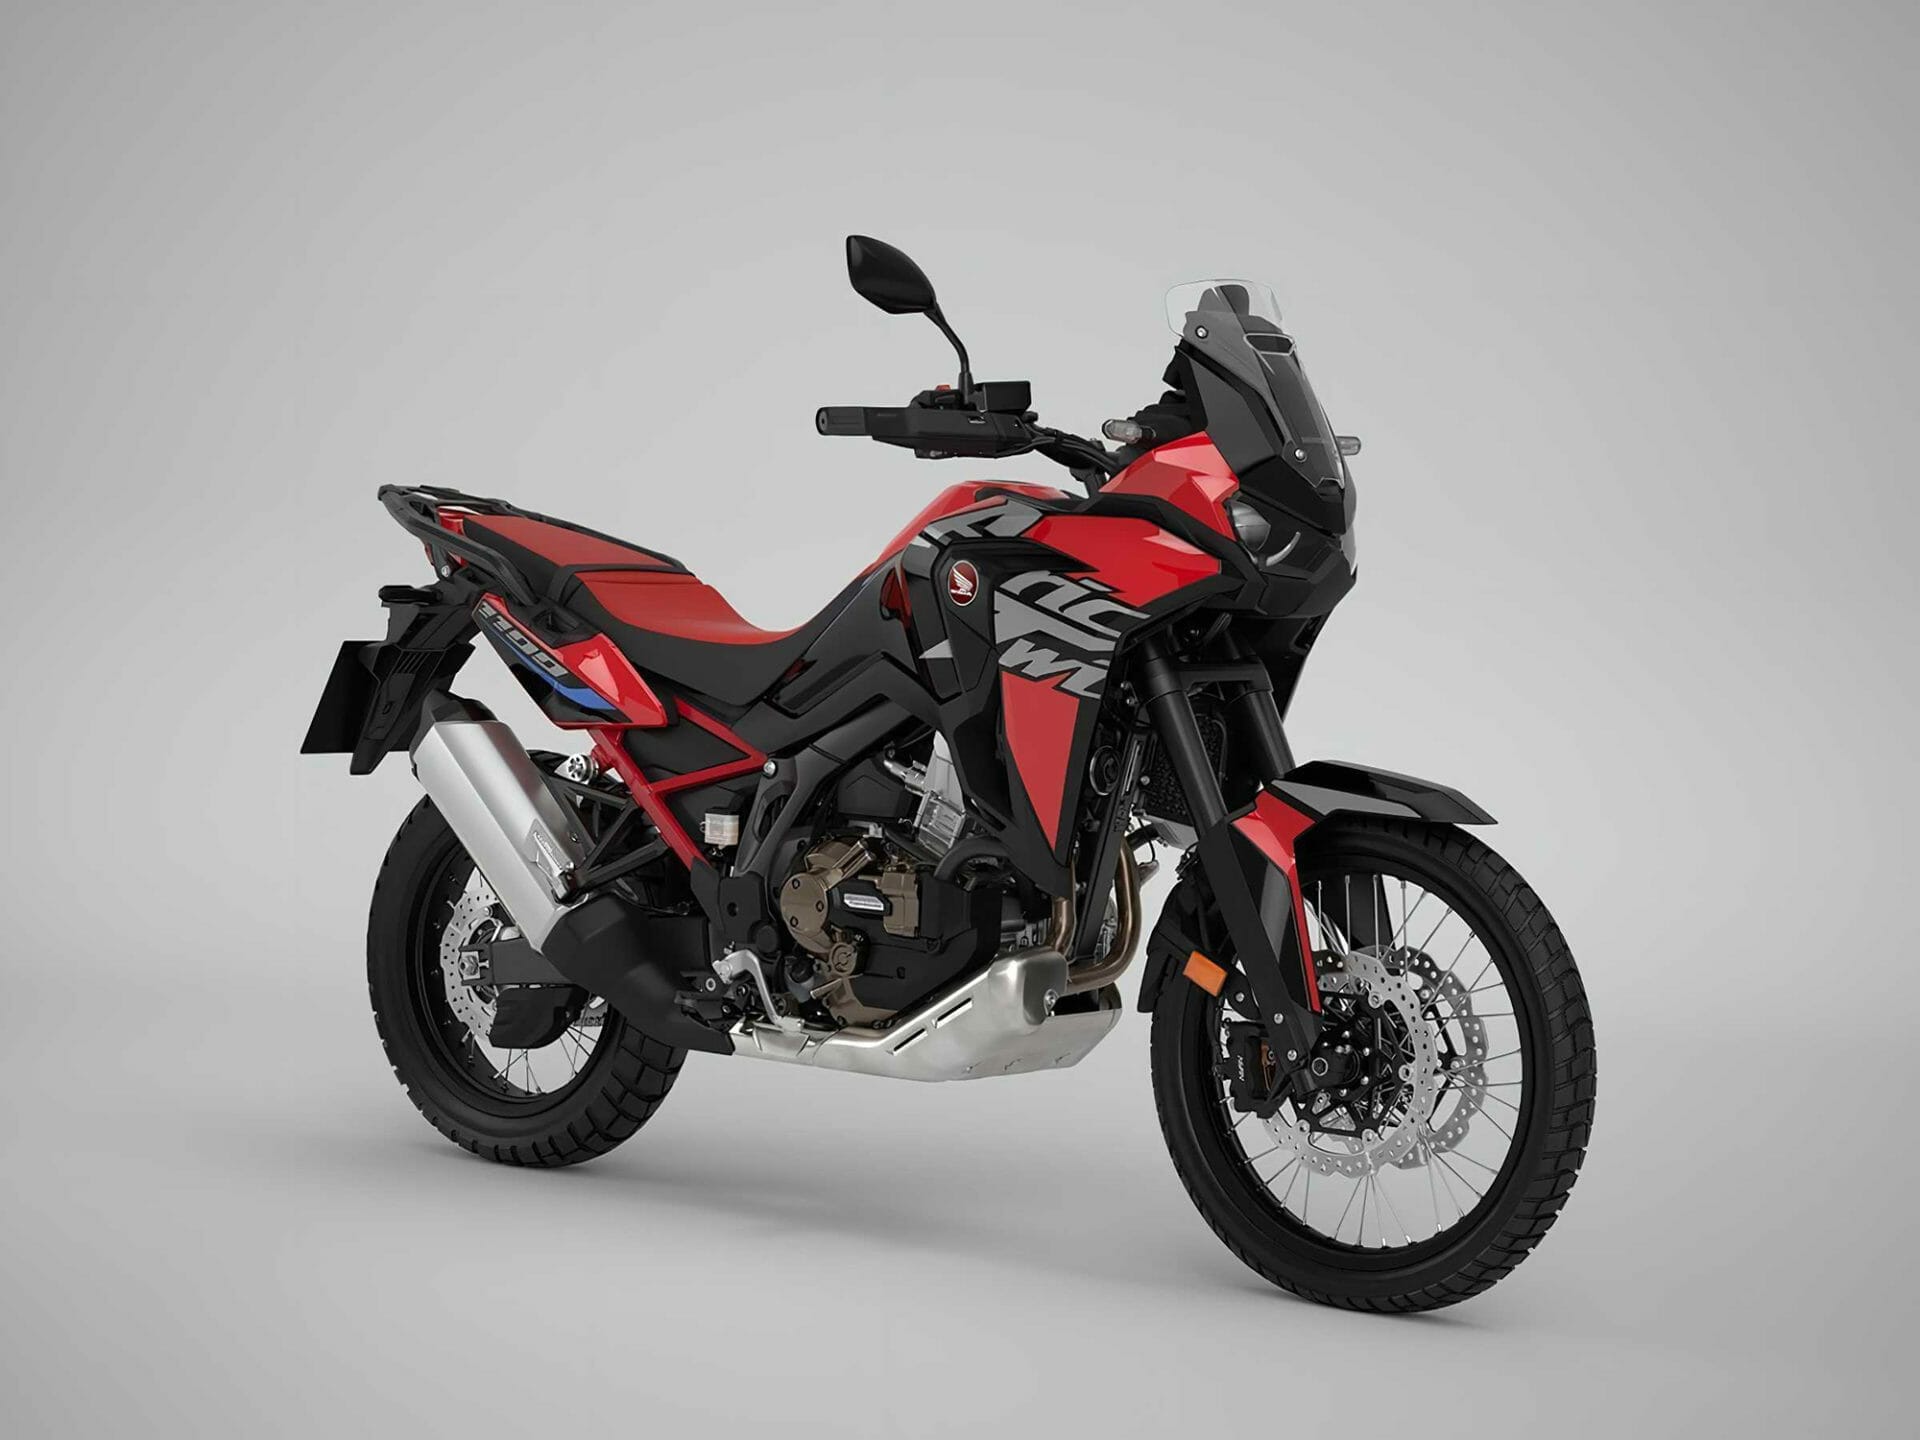 Honda CRF1100 Africa Twin 2023 in new colors - MOTORCYCLES.NEWS